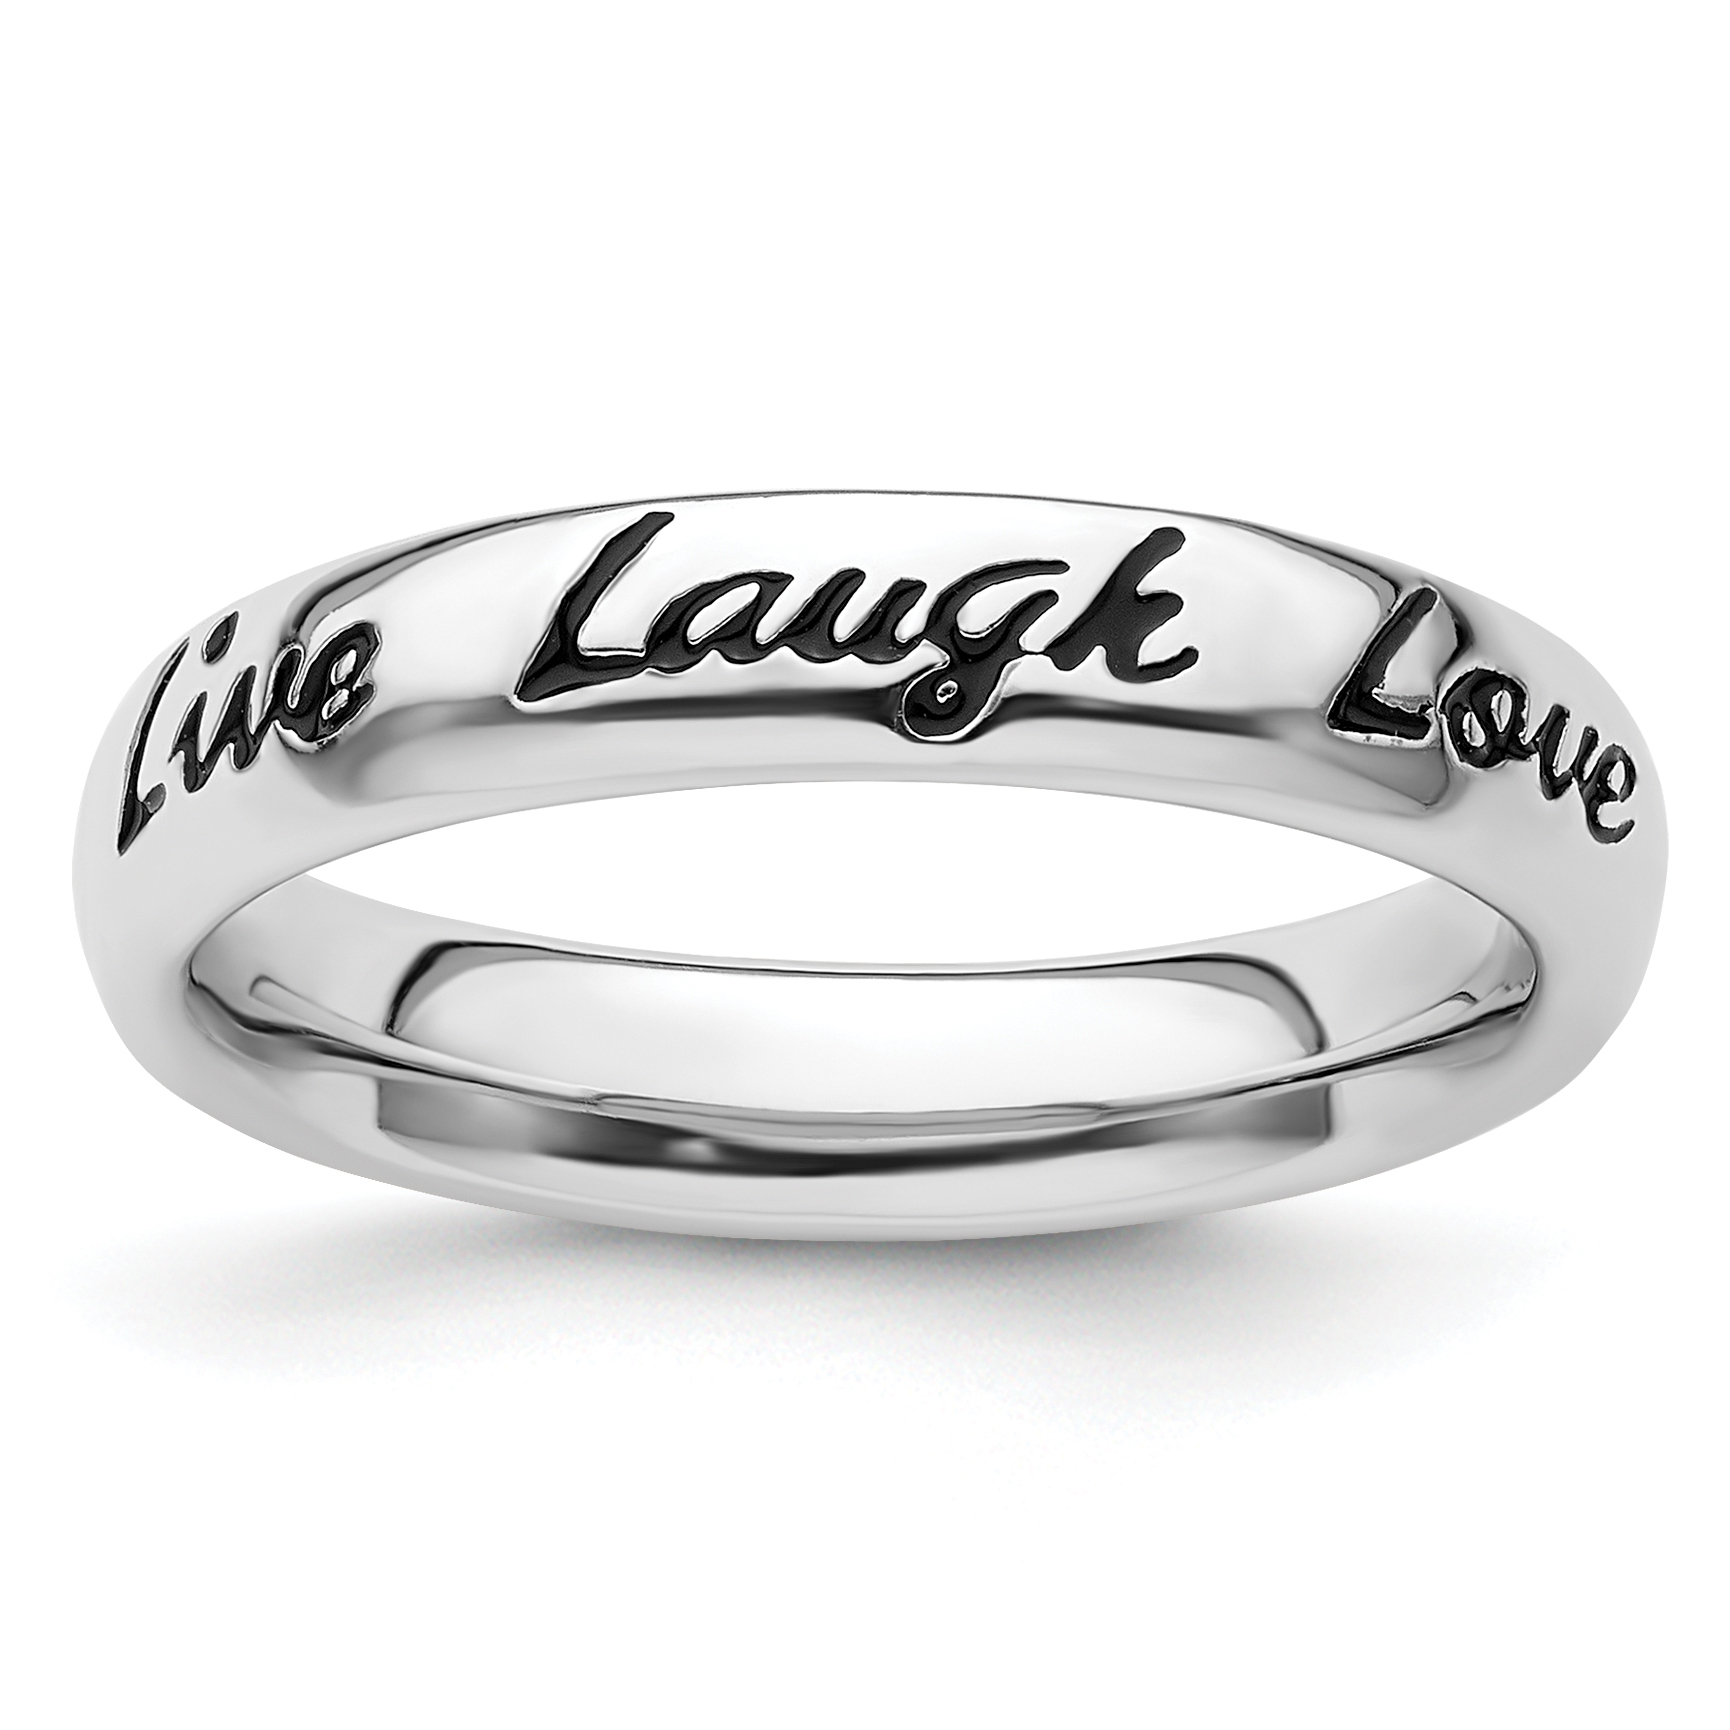 Stackable Expressions Sterling Silver Stackable Expressions Enamel Live Laugh Love Ring